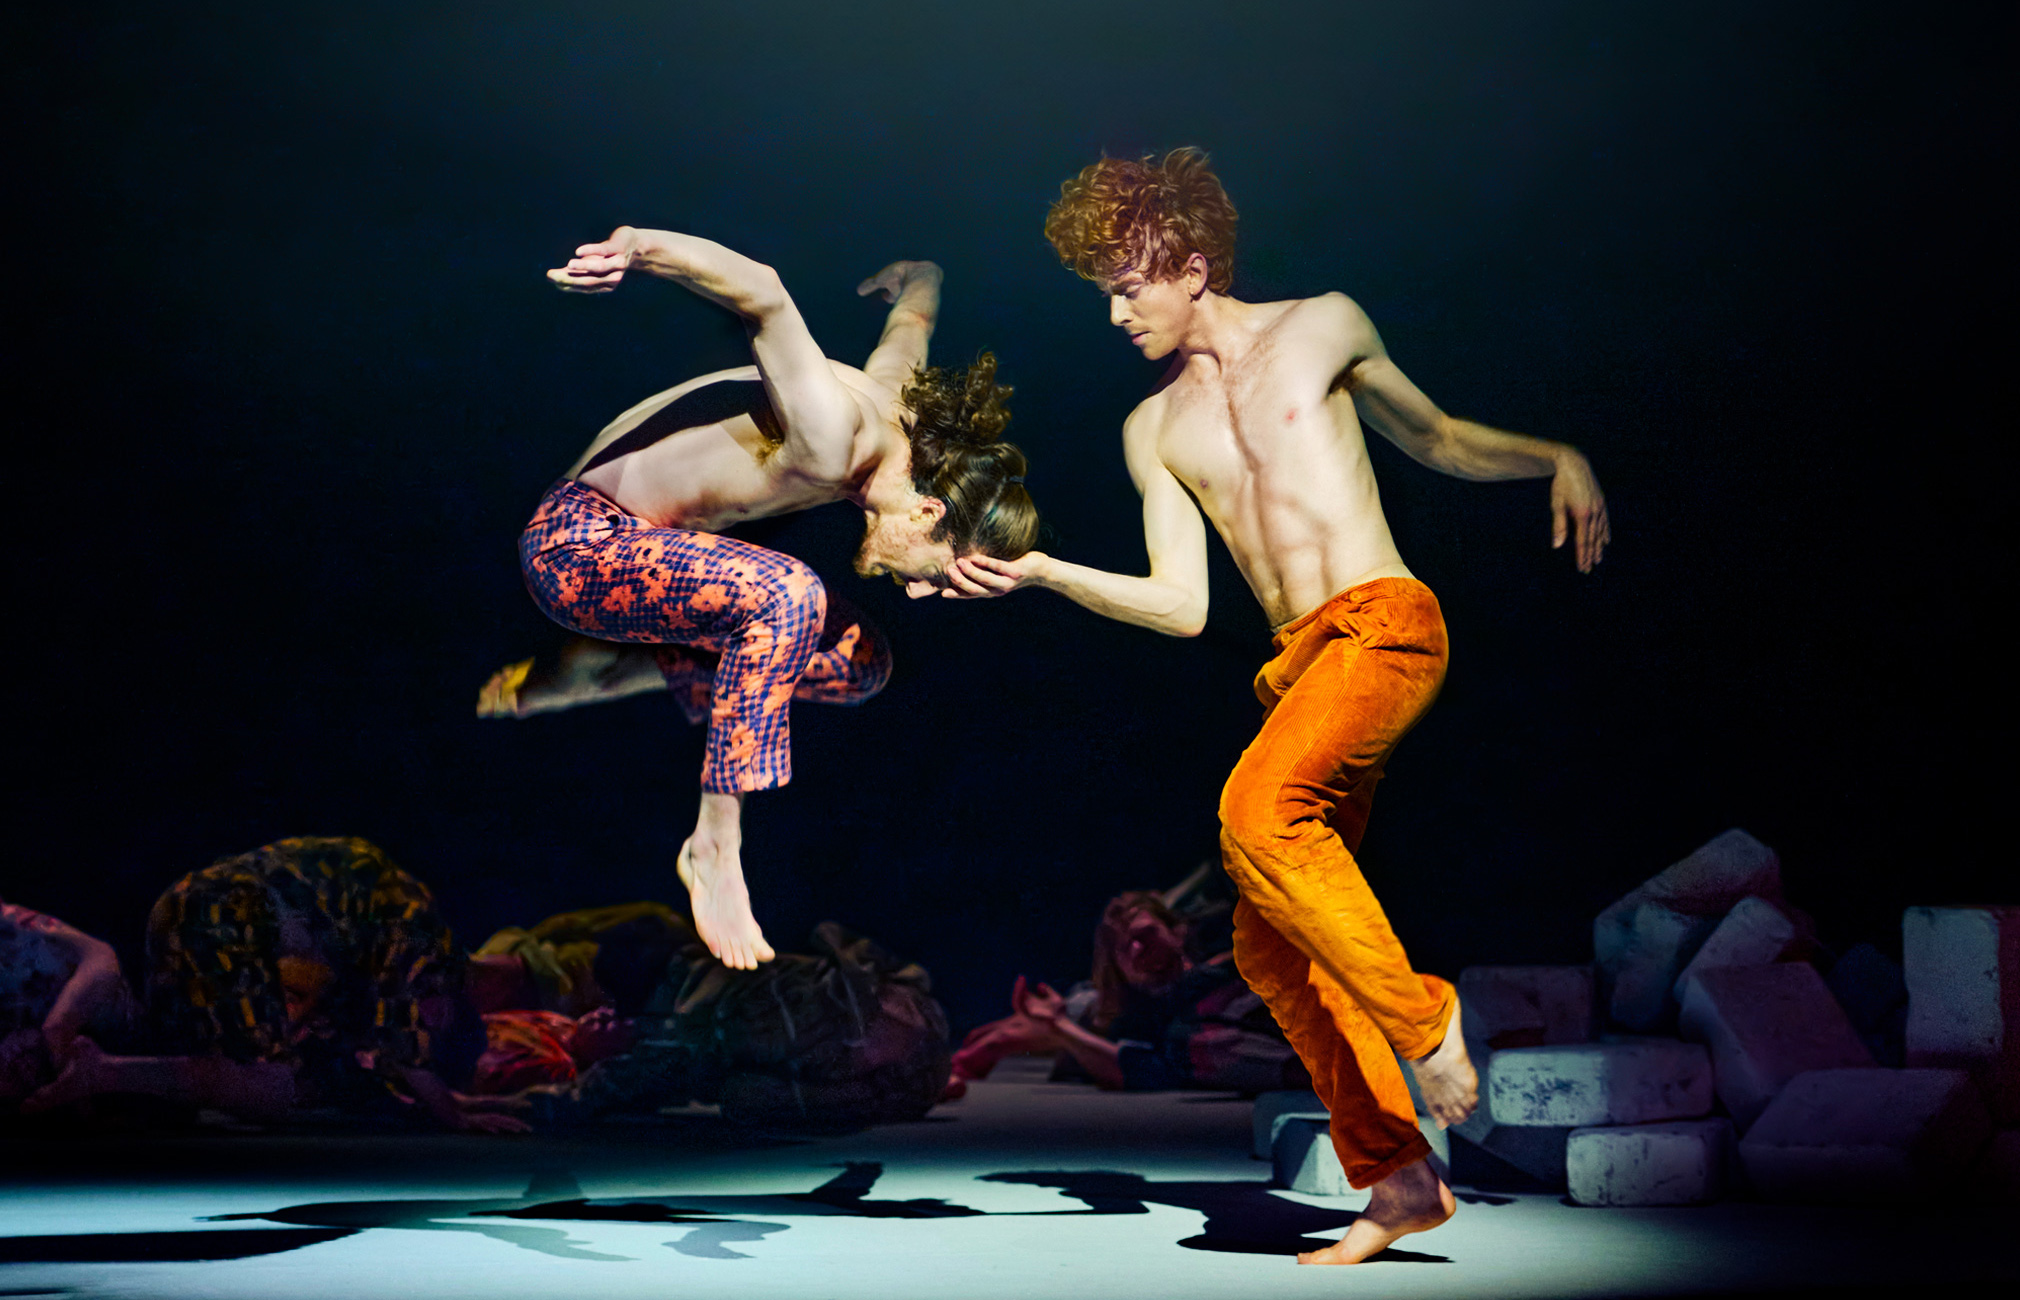 Two individuals in a dynamic and expressive dance pose. They are surrounded by darkness, save for a beam of light that illuminates them and casts shadows on the floor. One person is dressed in orange pants, while the other wears patterned pants. The background is dark, highlighting the dancing figures. Shadows on the floor mirror the dynamic poses of the two individuals. The light is focused on the dancers, providing the image with a dramatic effect. There are multiple objects or people in the background that are not clearly visible.